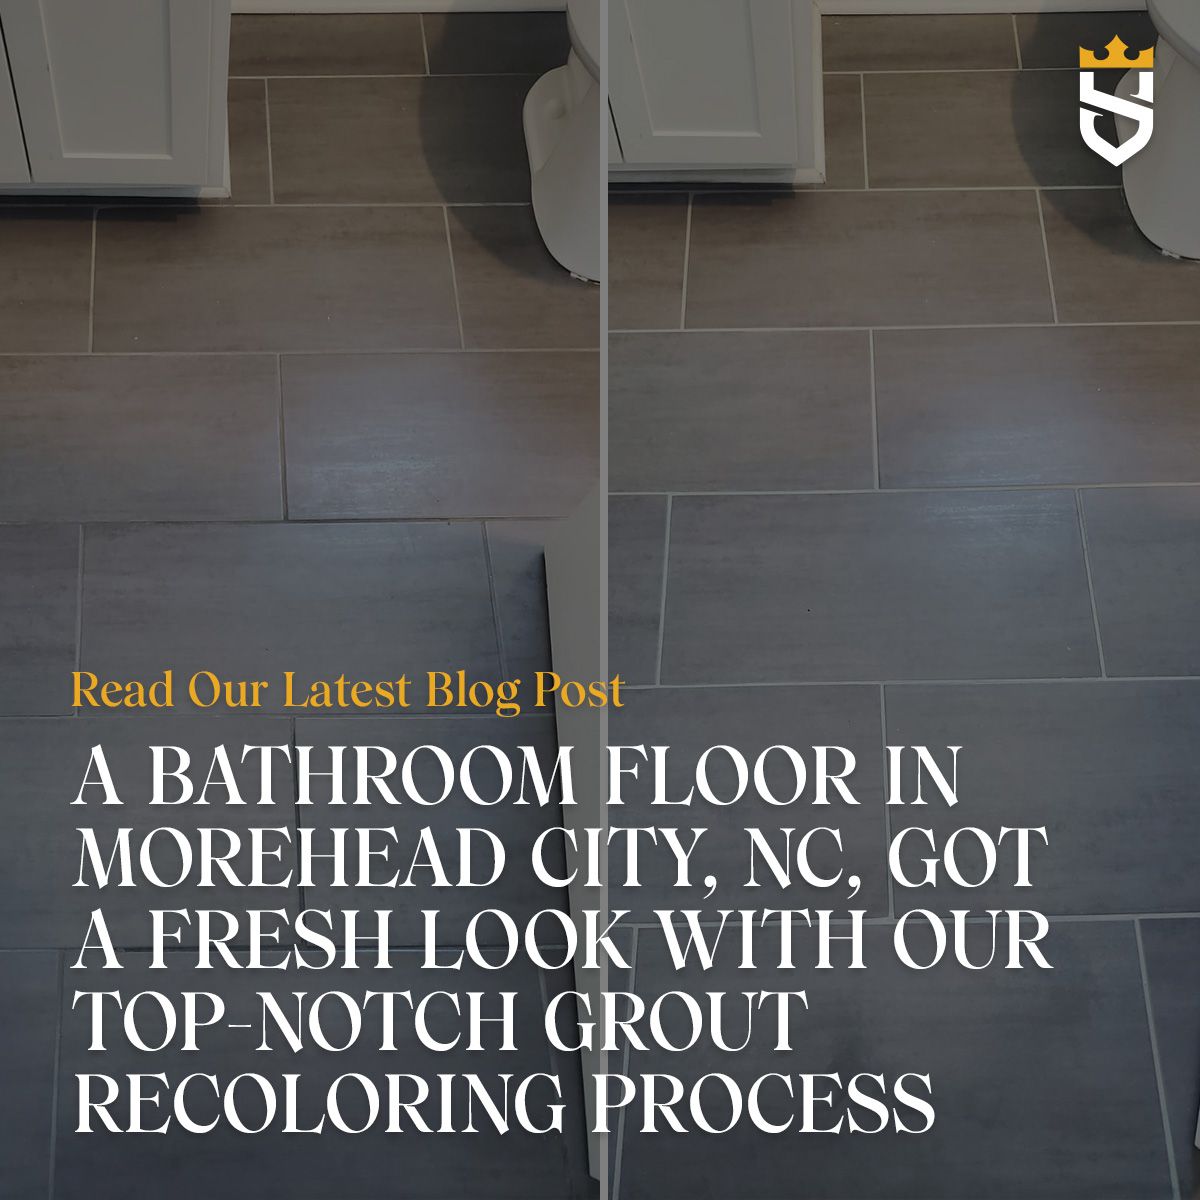 A Bathroom Floor in Morehead City, NC, Got a Fresh Look With Our Top-Notch Grout Recoloring Process